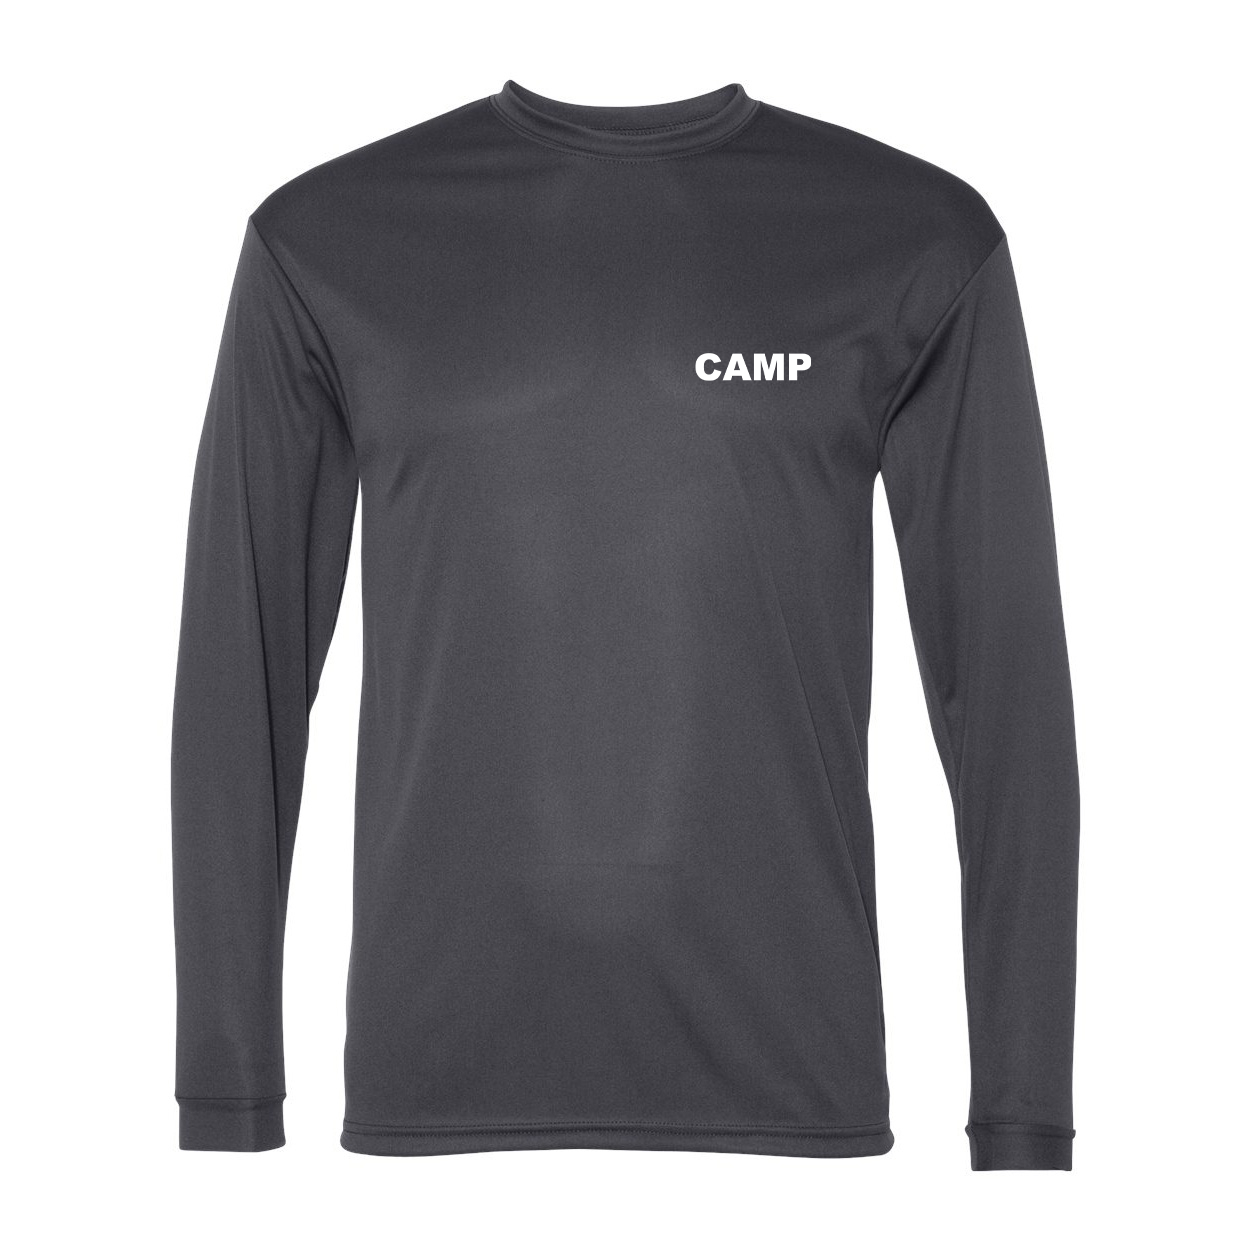 Camp Brand Logo Night Out Unisex Performance Long Sleeve T-Shirt Graphite